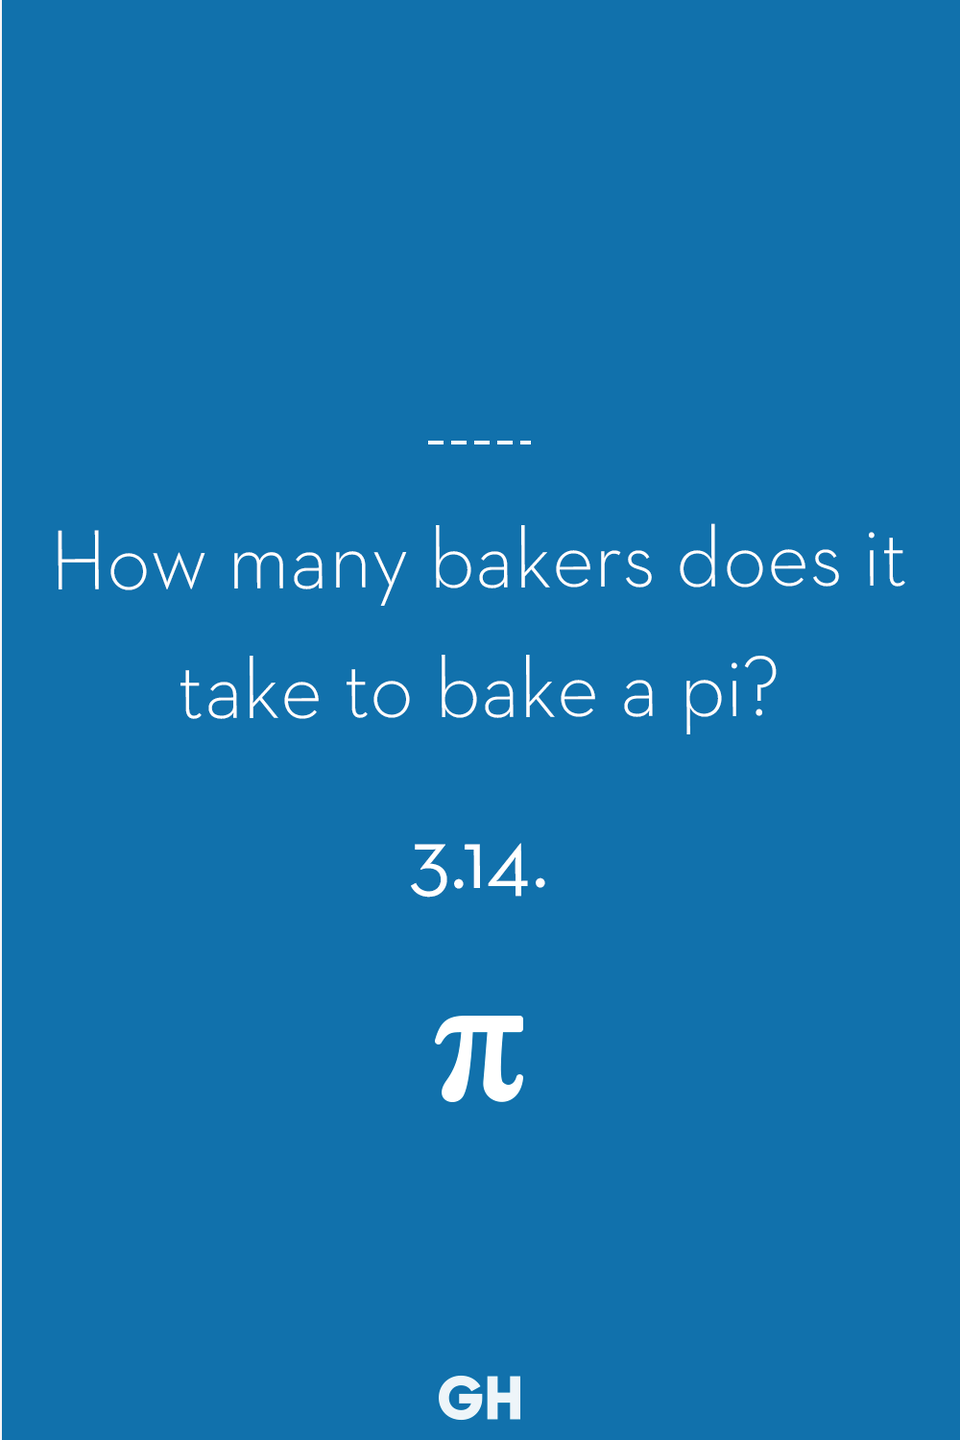 11) How many bakers does it take to bake a pi?